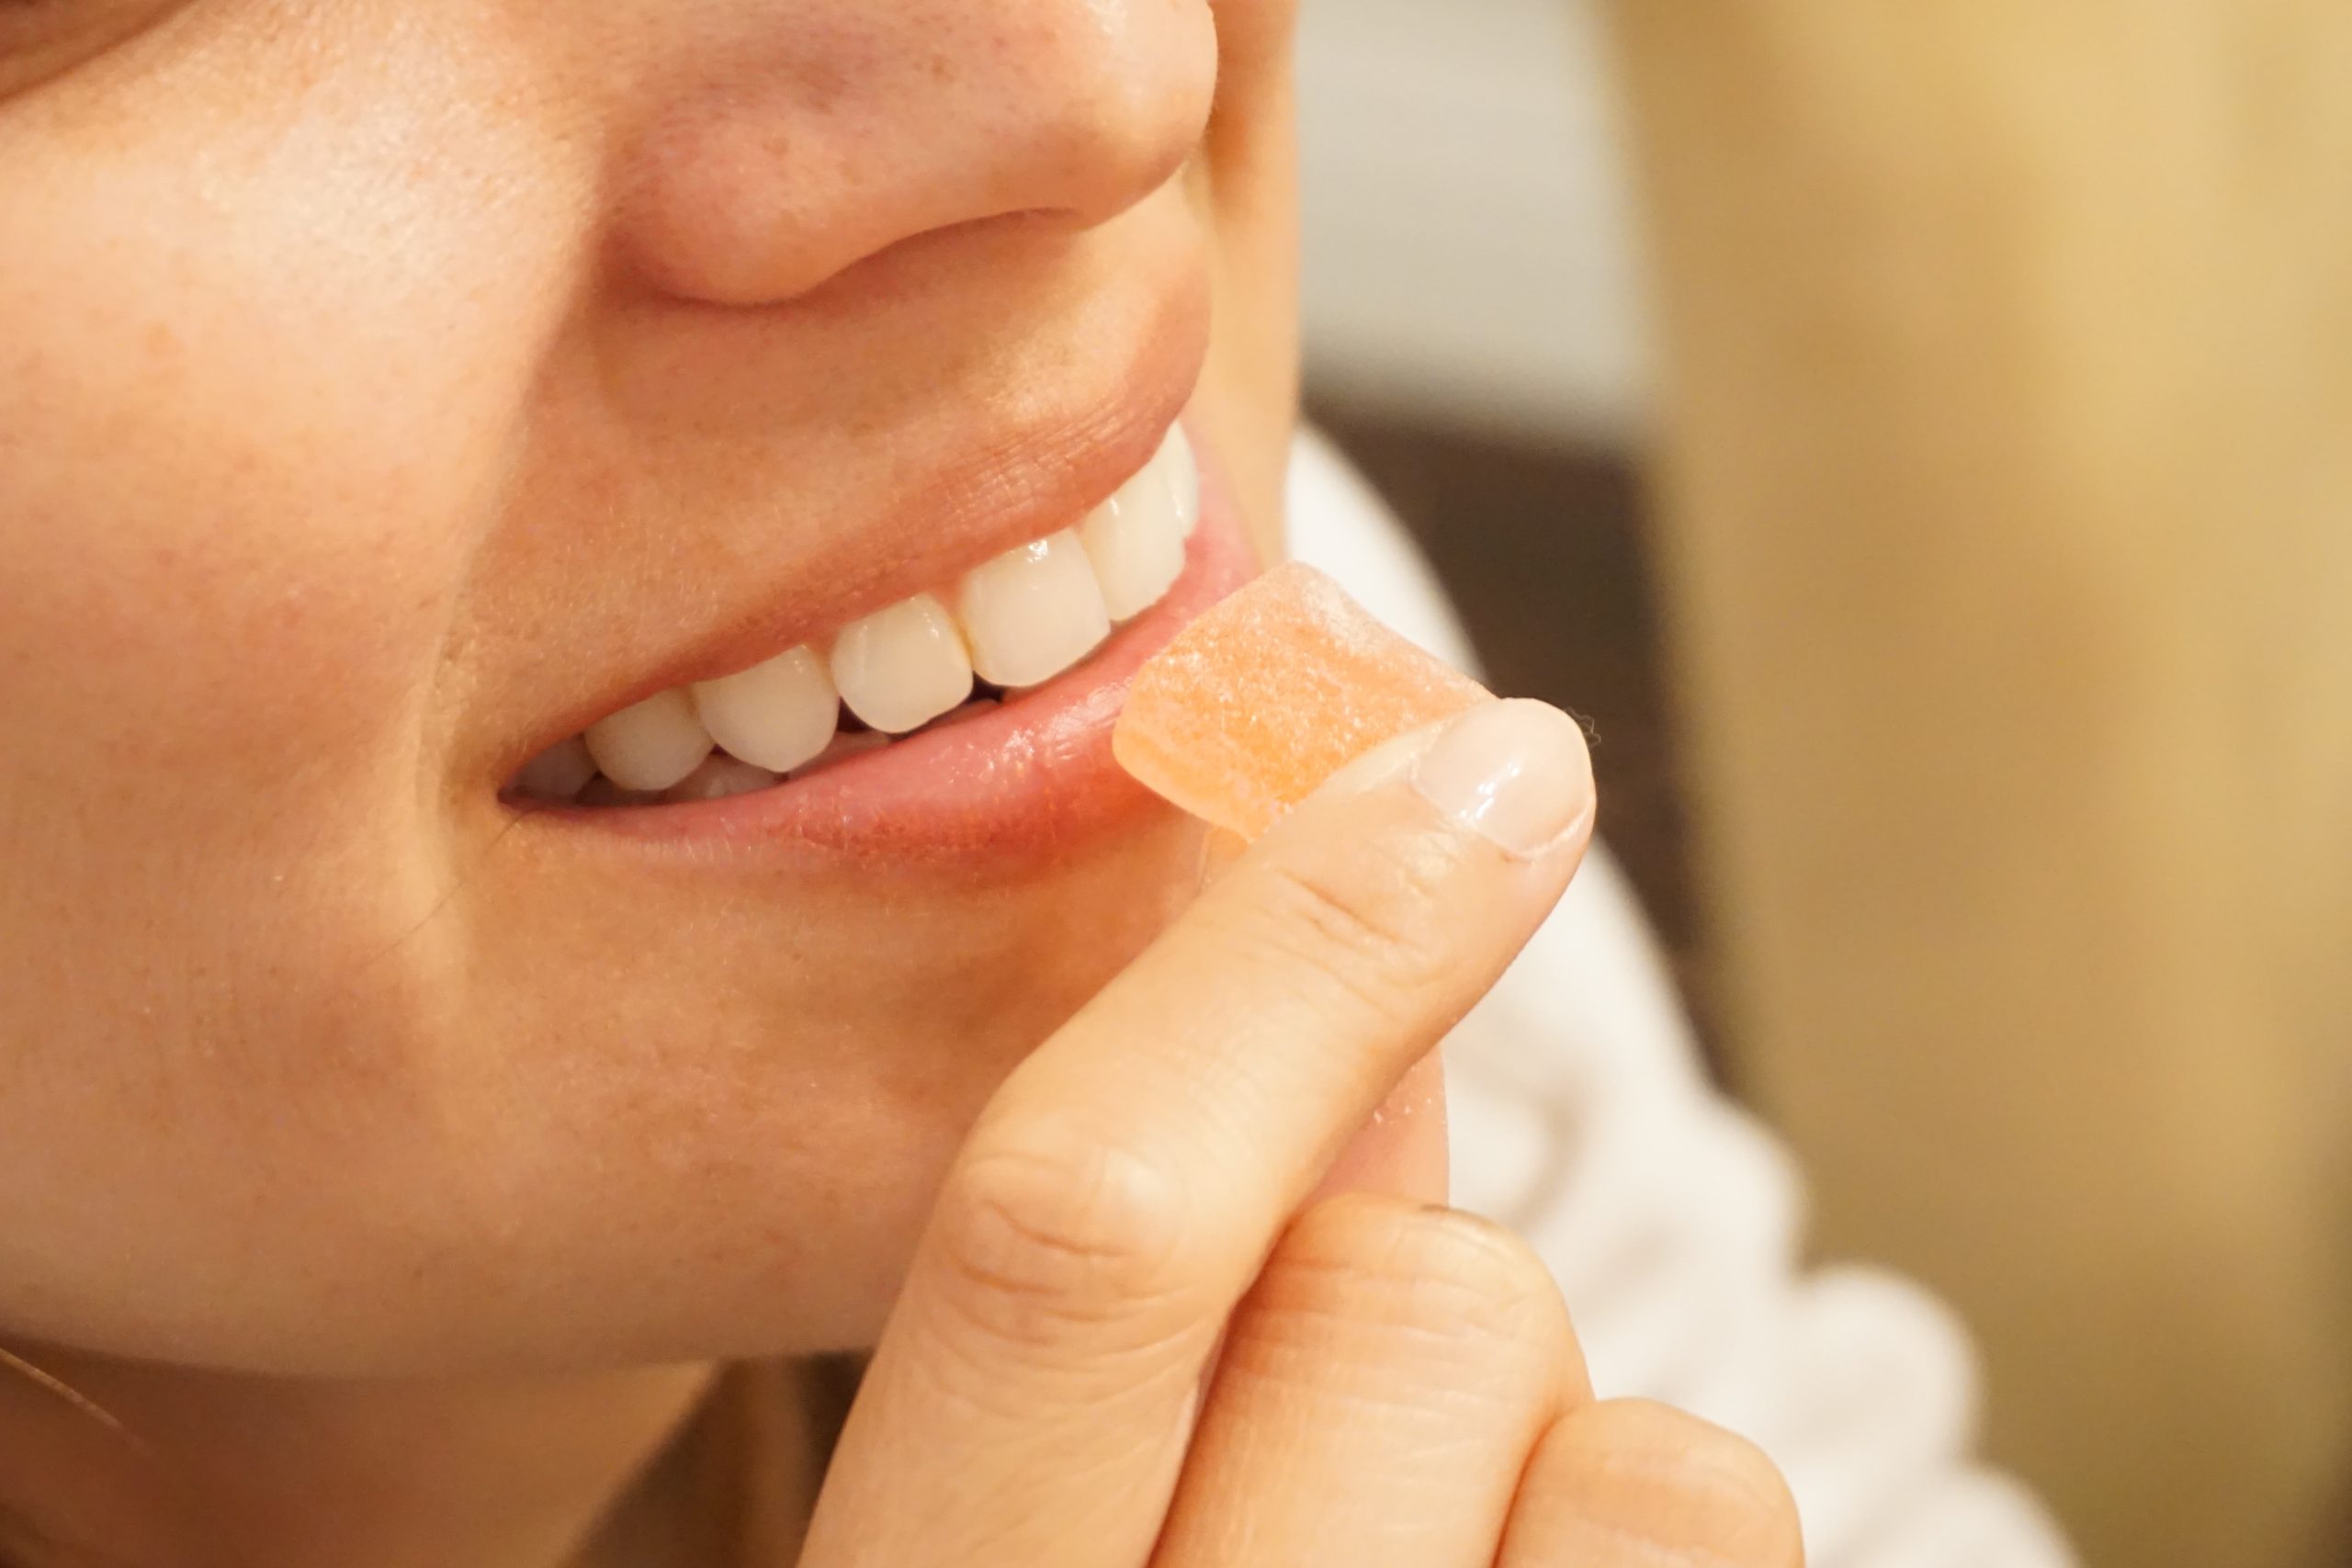 A close up photo of a smiling person holding a square gummy. The gummy is held up to her lips.